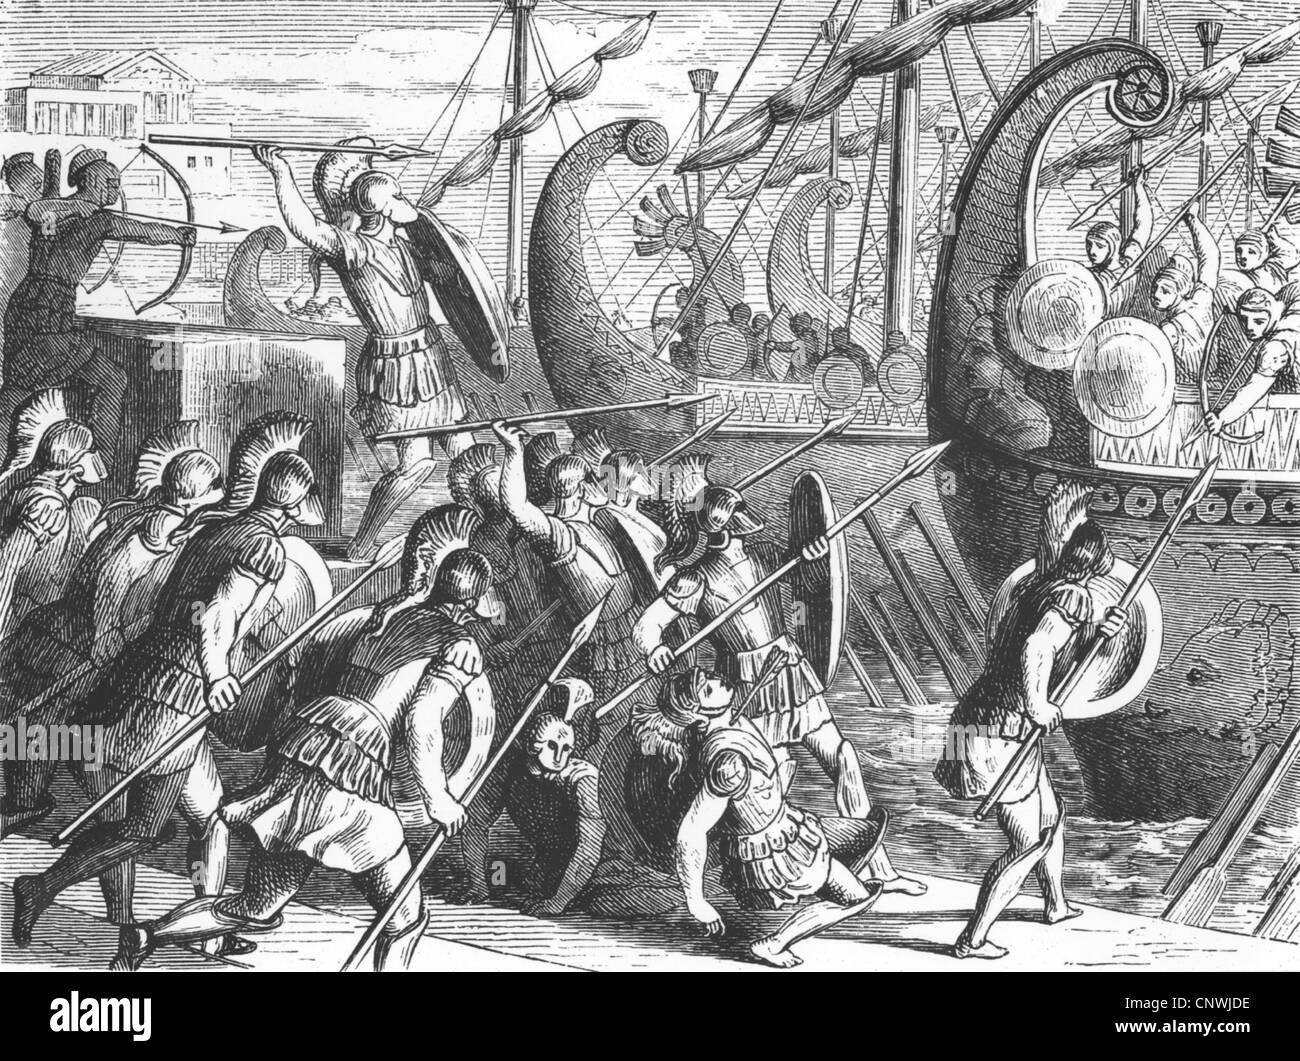 events, Peloponnesian War, 431 - 404 vChr., Spartans under Brasidas defending Methoni against the Athenians, wood engraving, 19th century, Sparta, Athens, Hellas, Greece, fighting, hoplite, warrior, warriors, defense, defence, landing, ship, ships, fight, fighting, battle, battling, historic, historical, ancient world, people, Additional-Rights-Clearences-Not Available Stock Photo